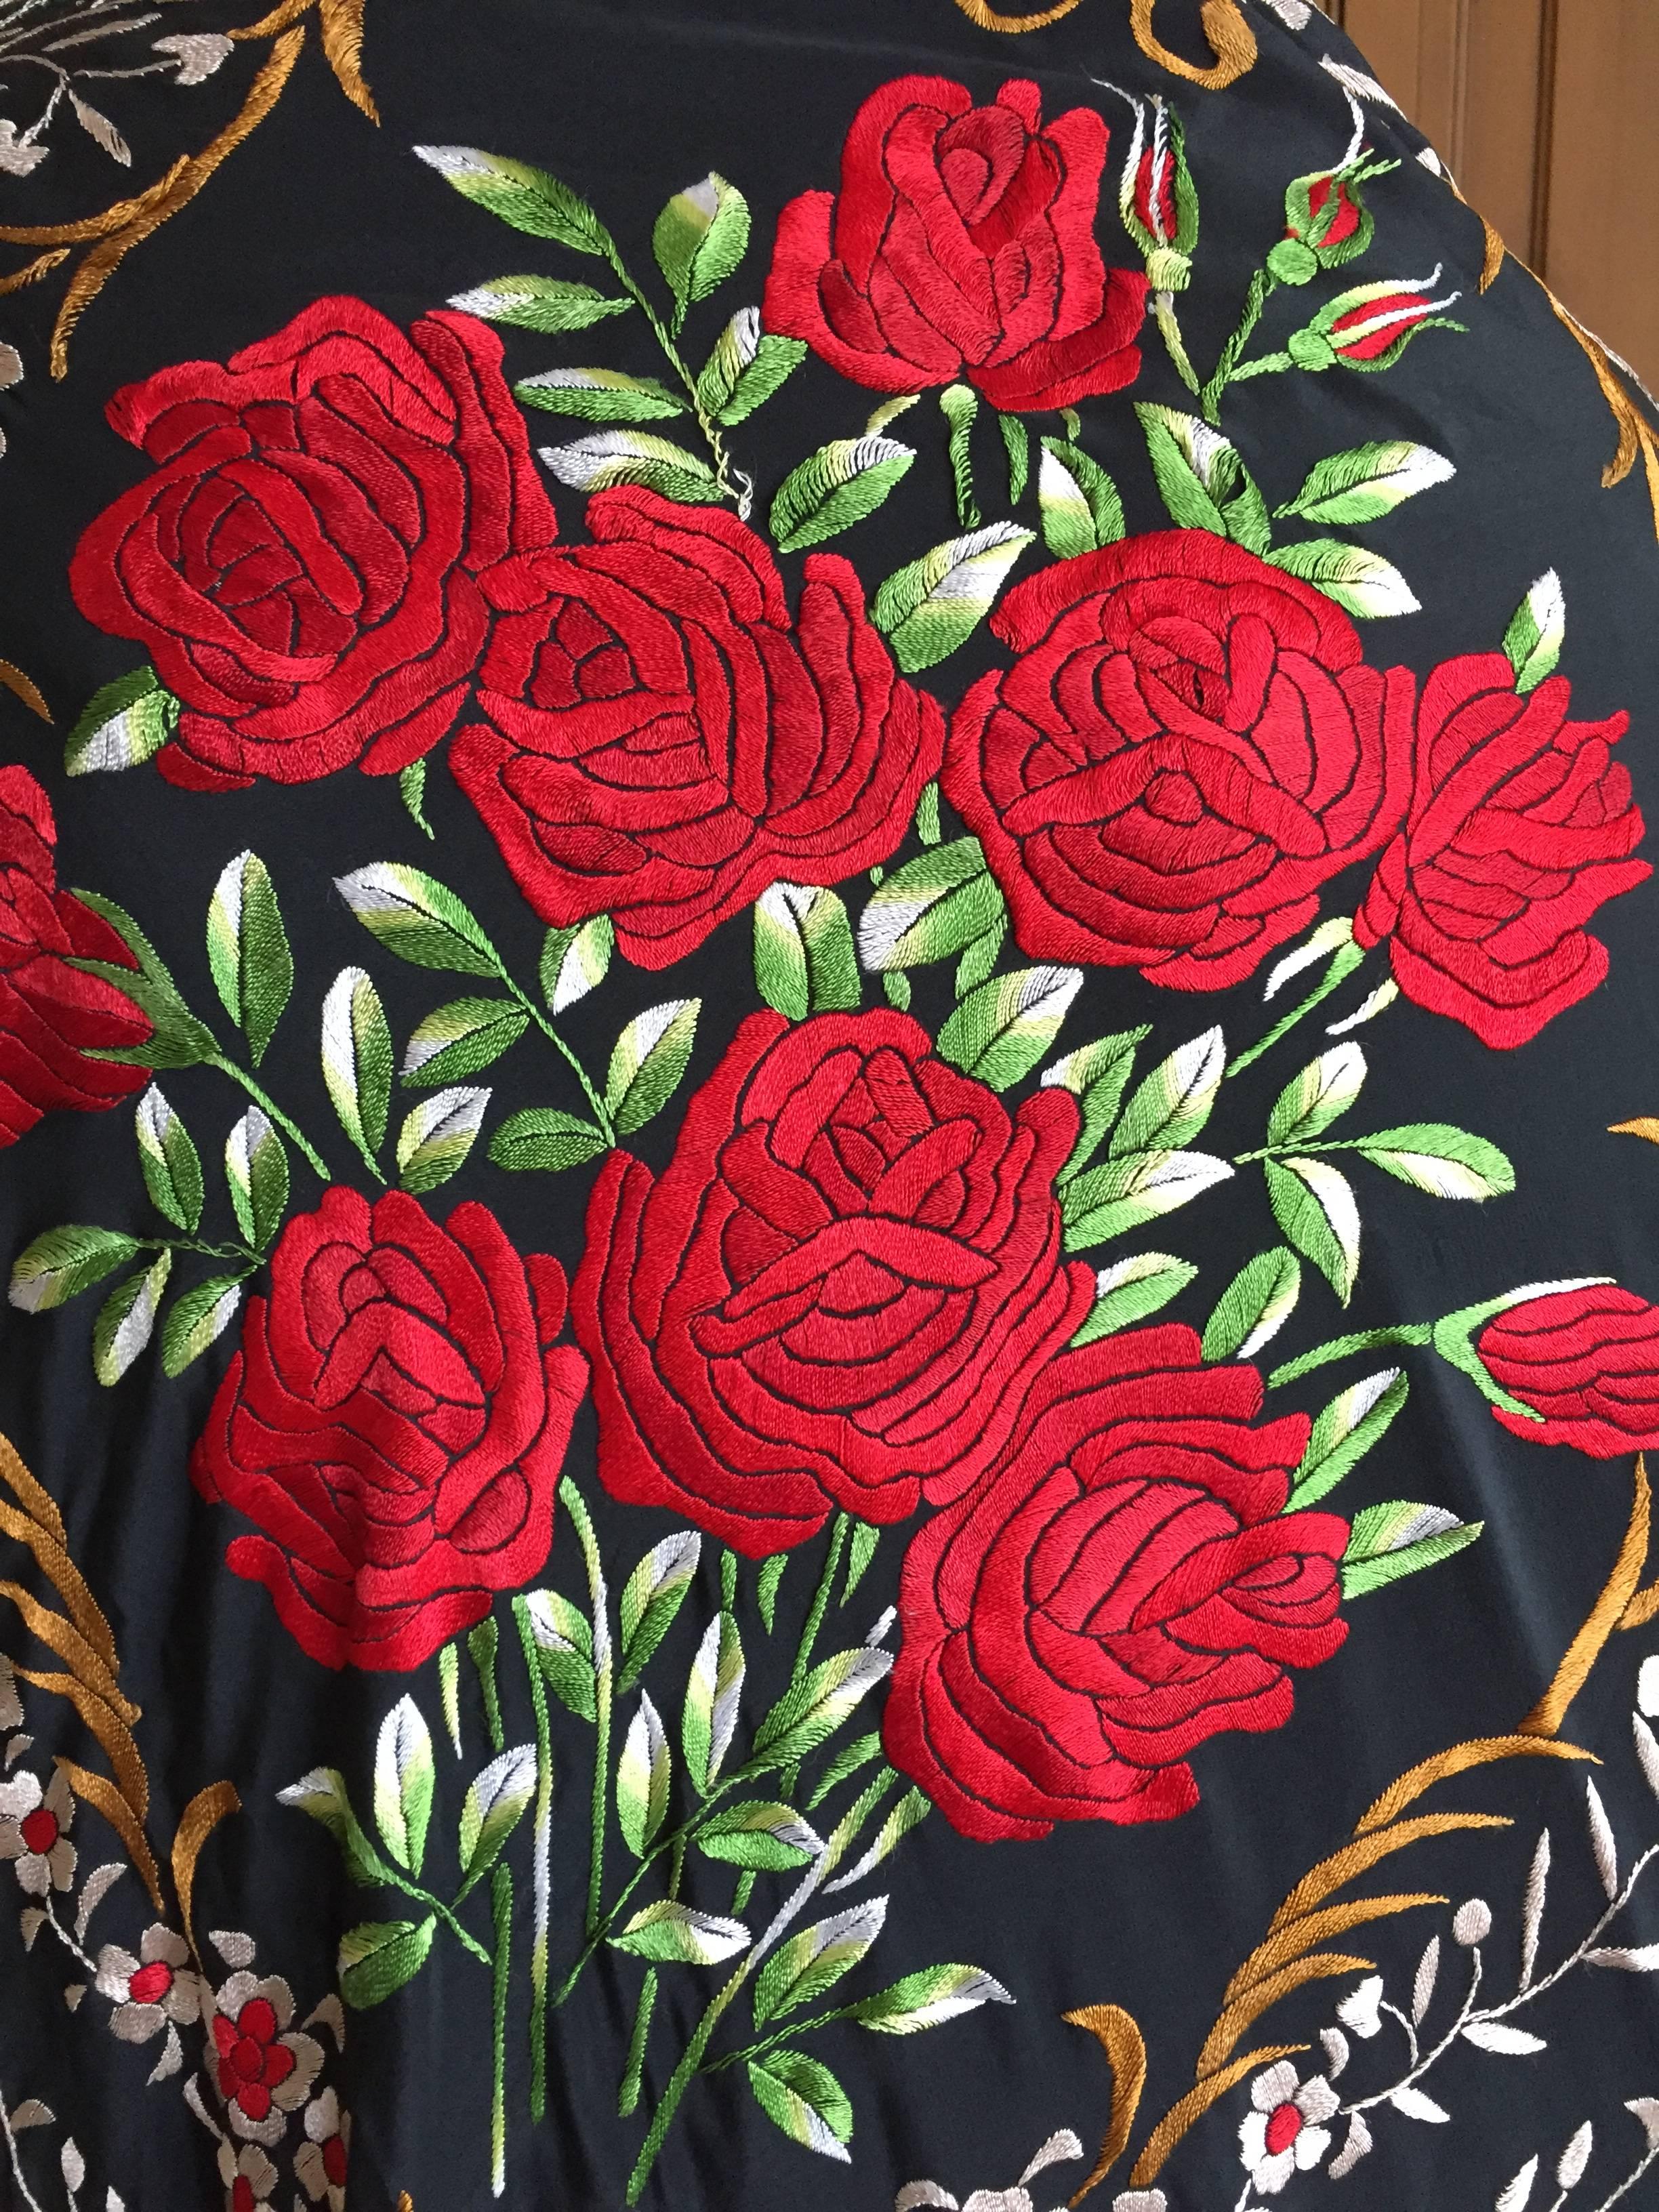 Exquisite Embroidered Roses Antique Canton Fringe Piano Shawl For Sale 5